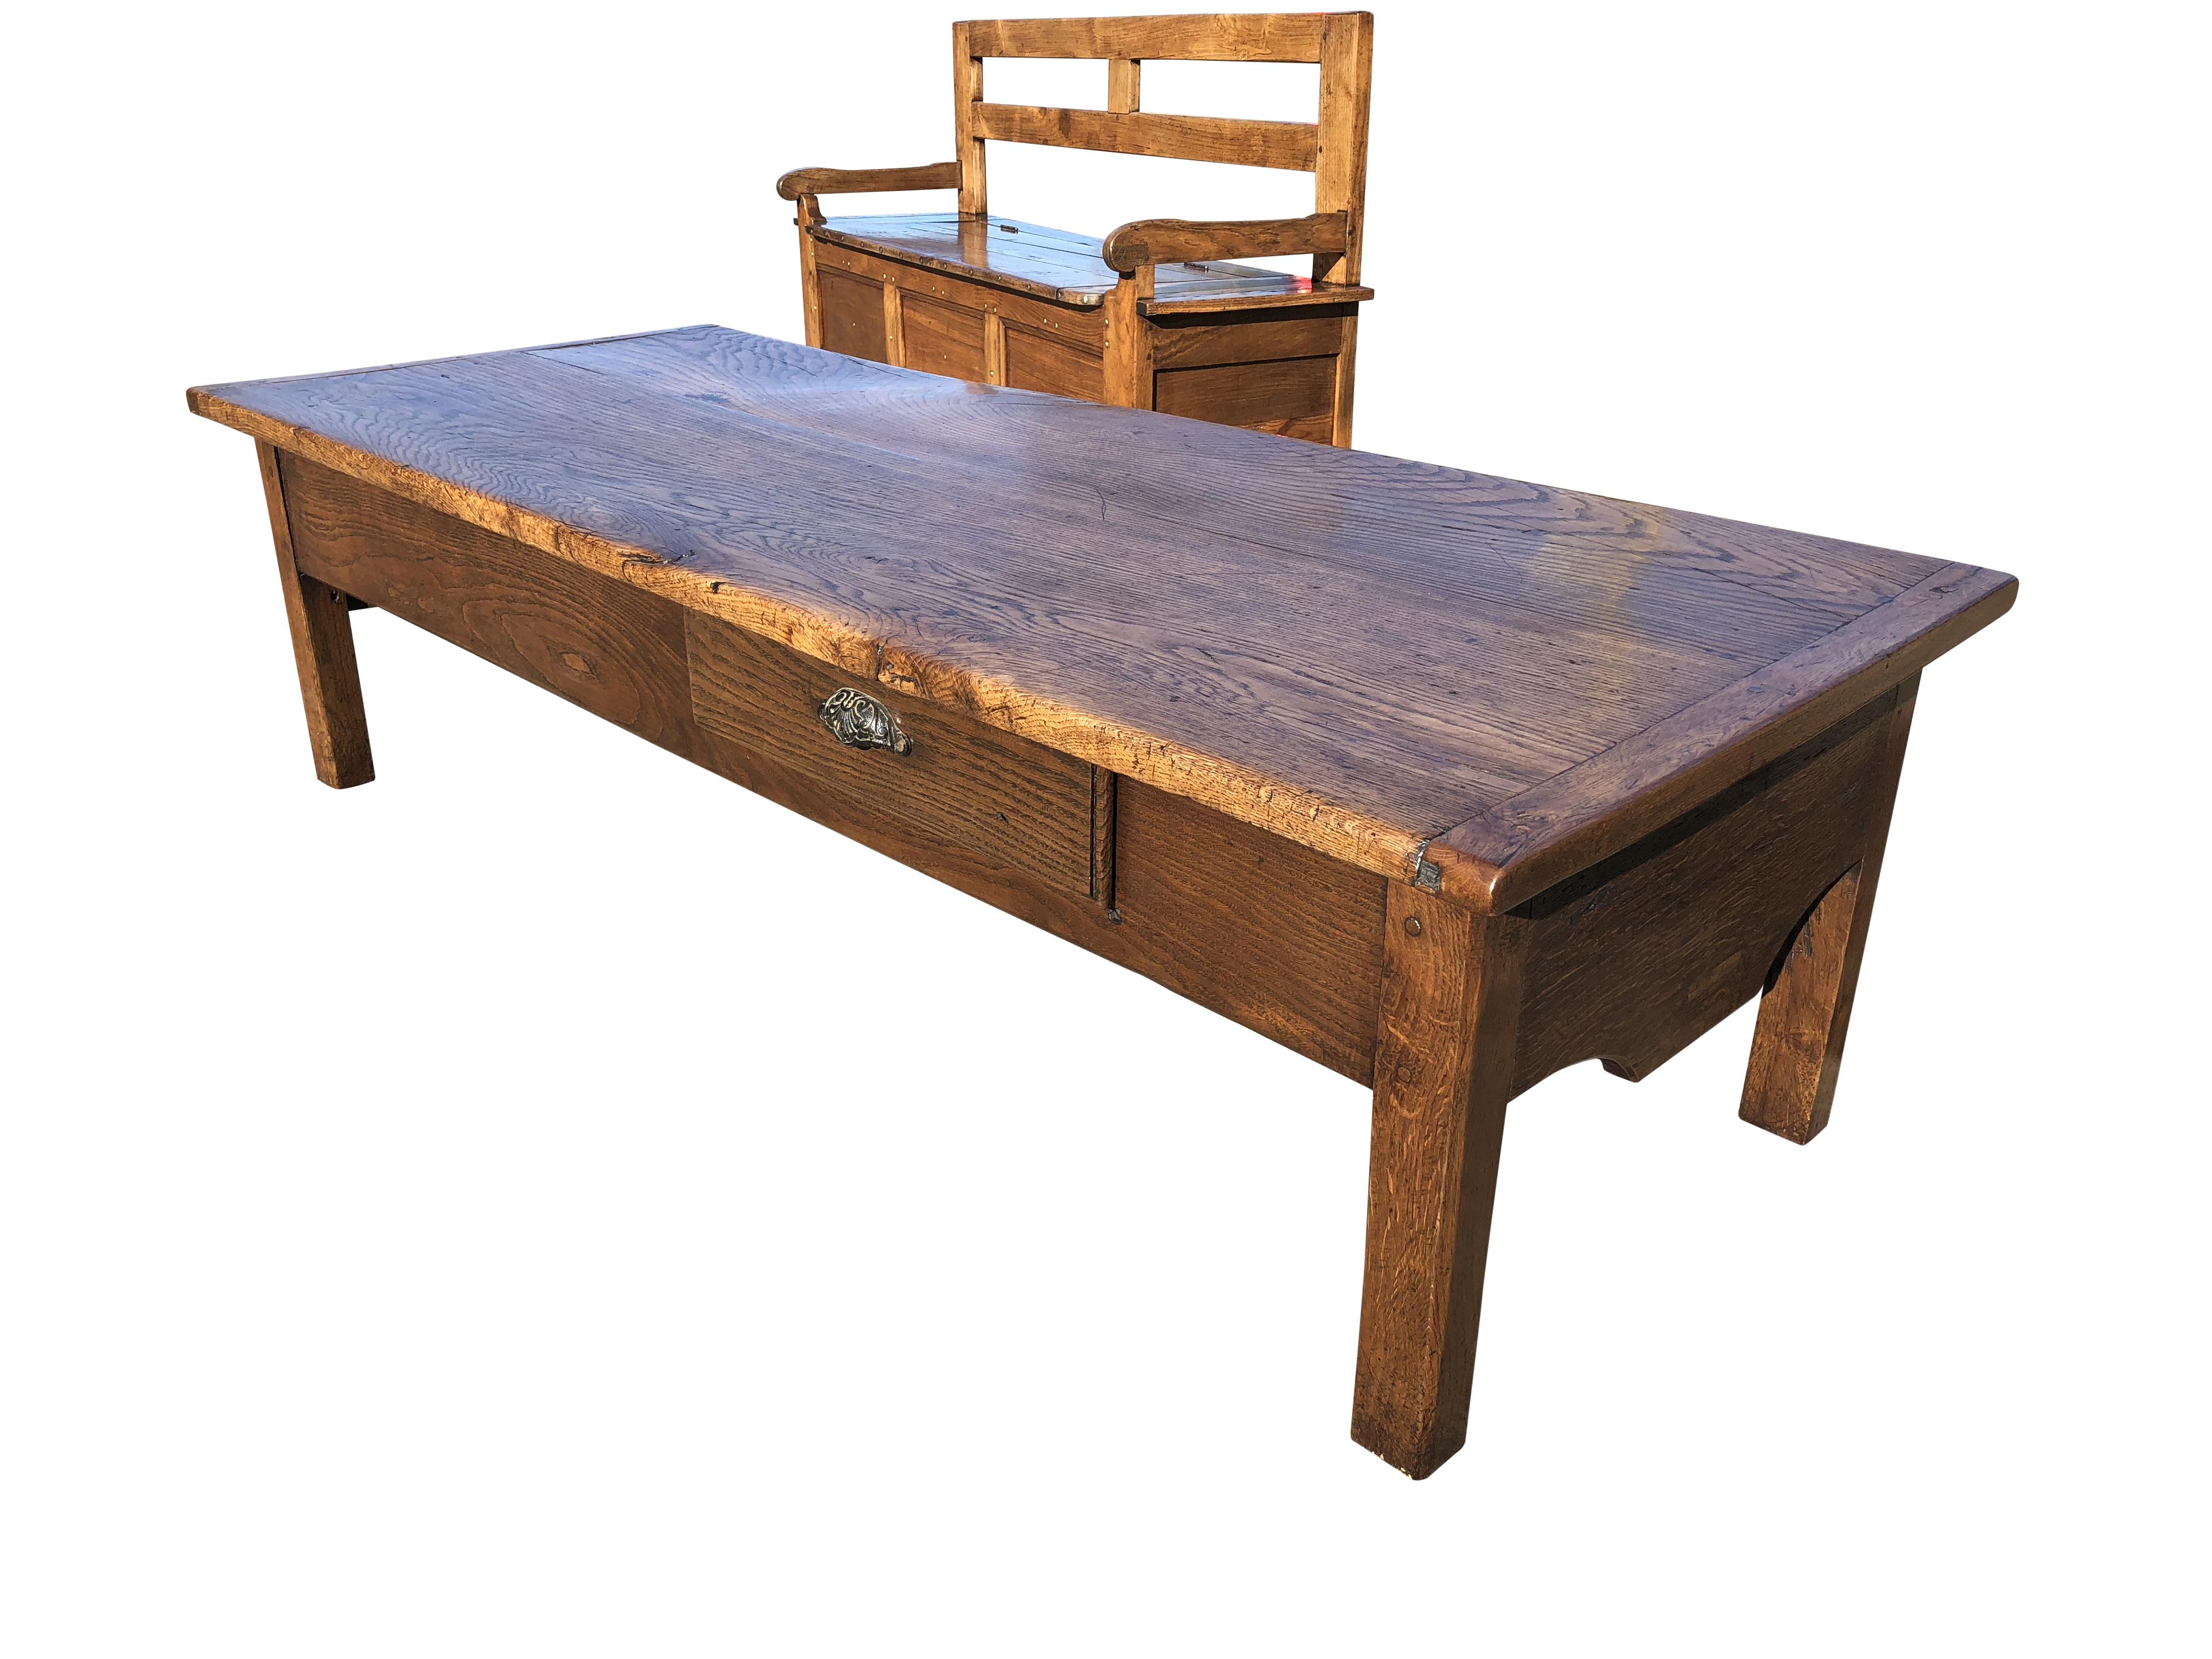 An Imposing French farmhouse oak coffee table of exceptional color and figuring with excellent storage.